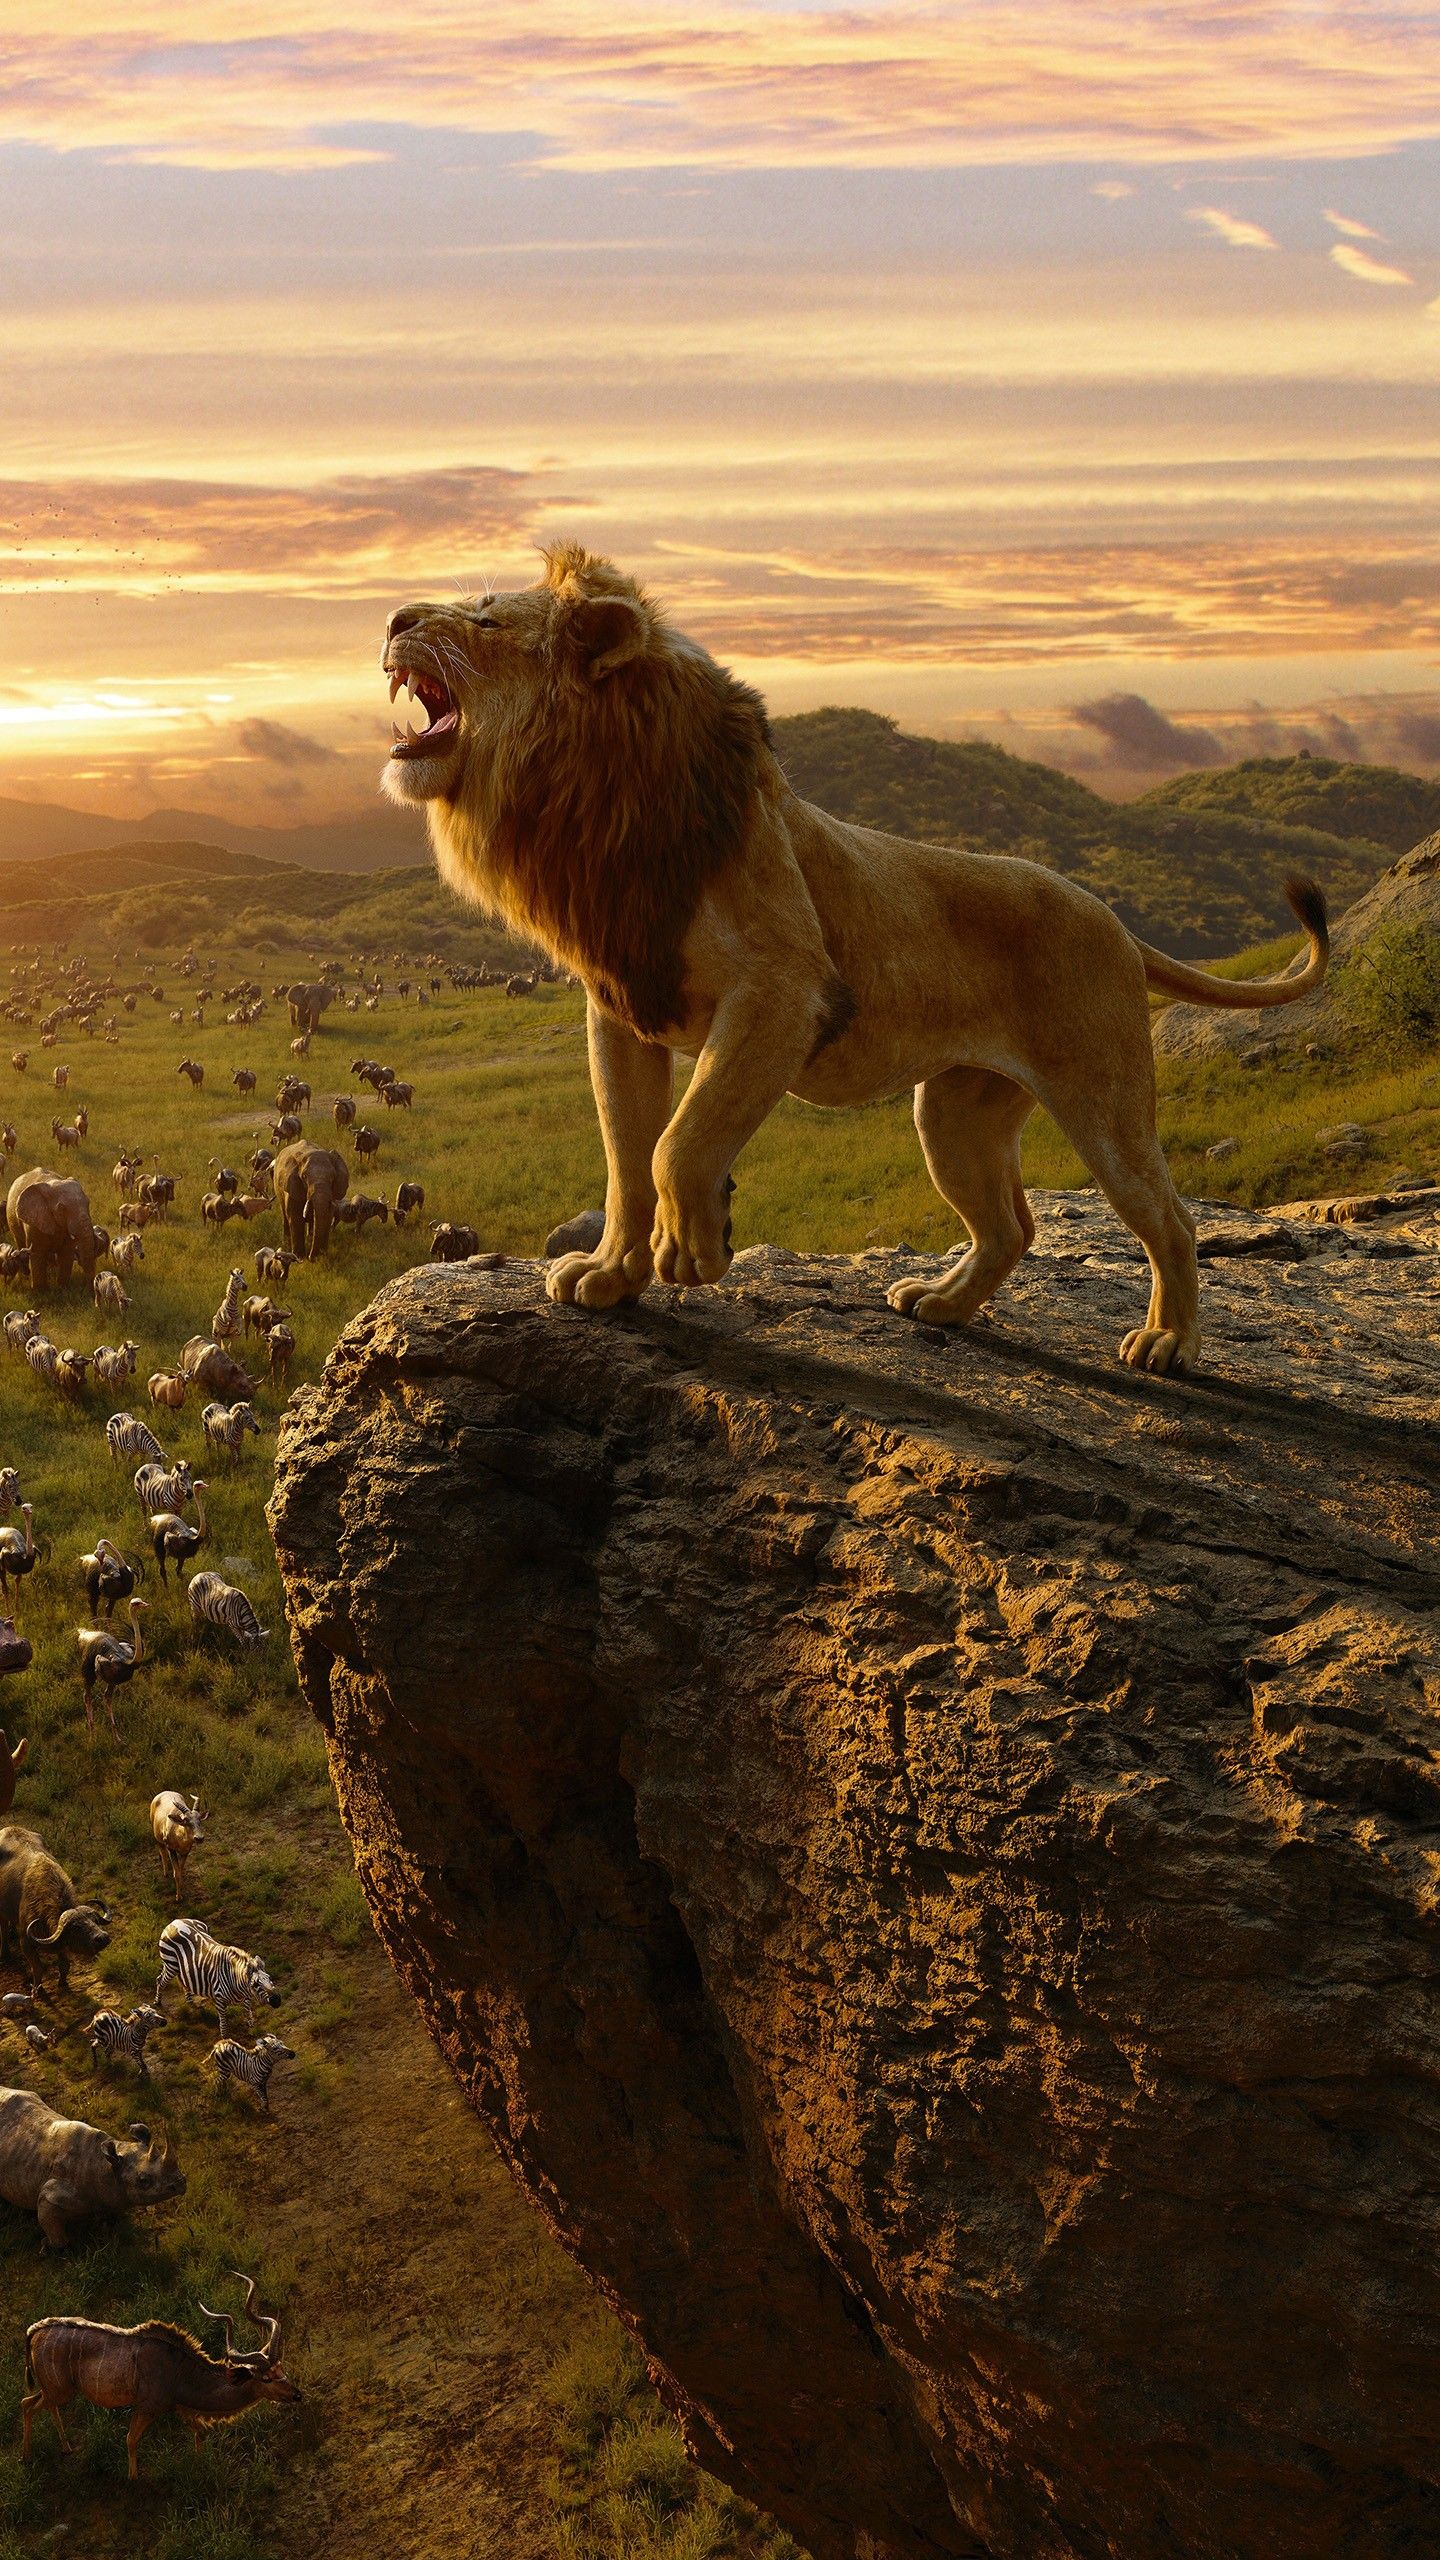 The Lion King Ultra HD Wallpapers - Wallpaper Cave